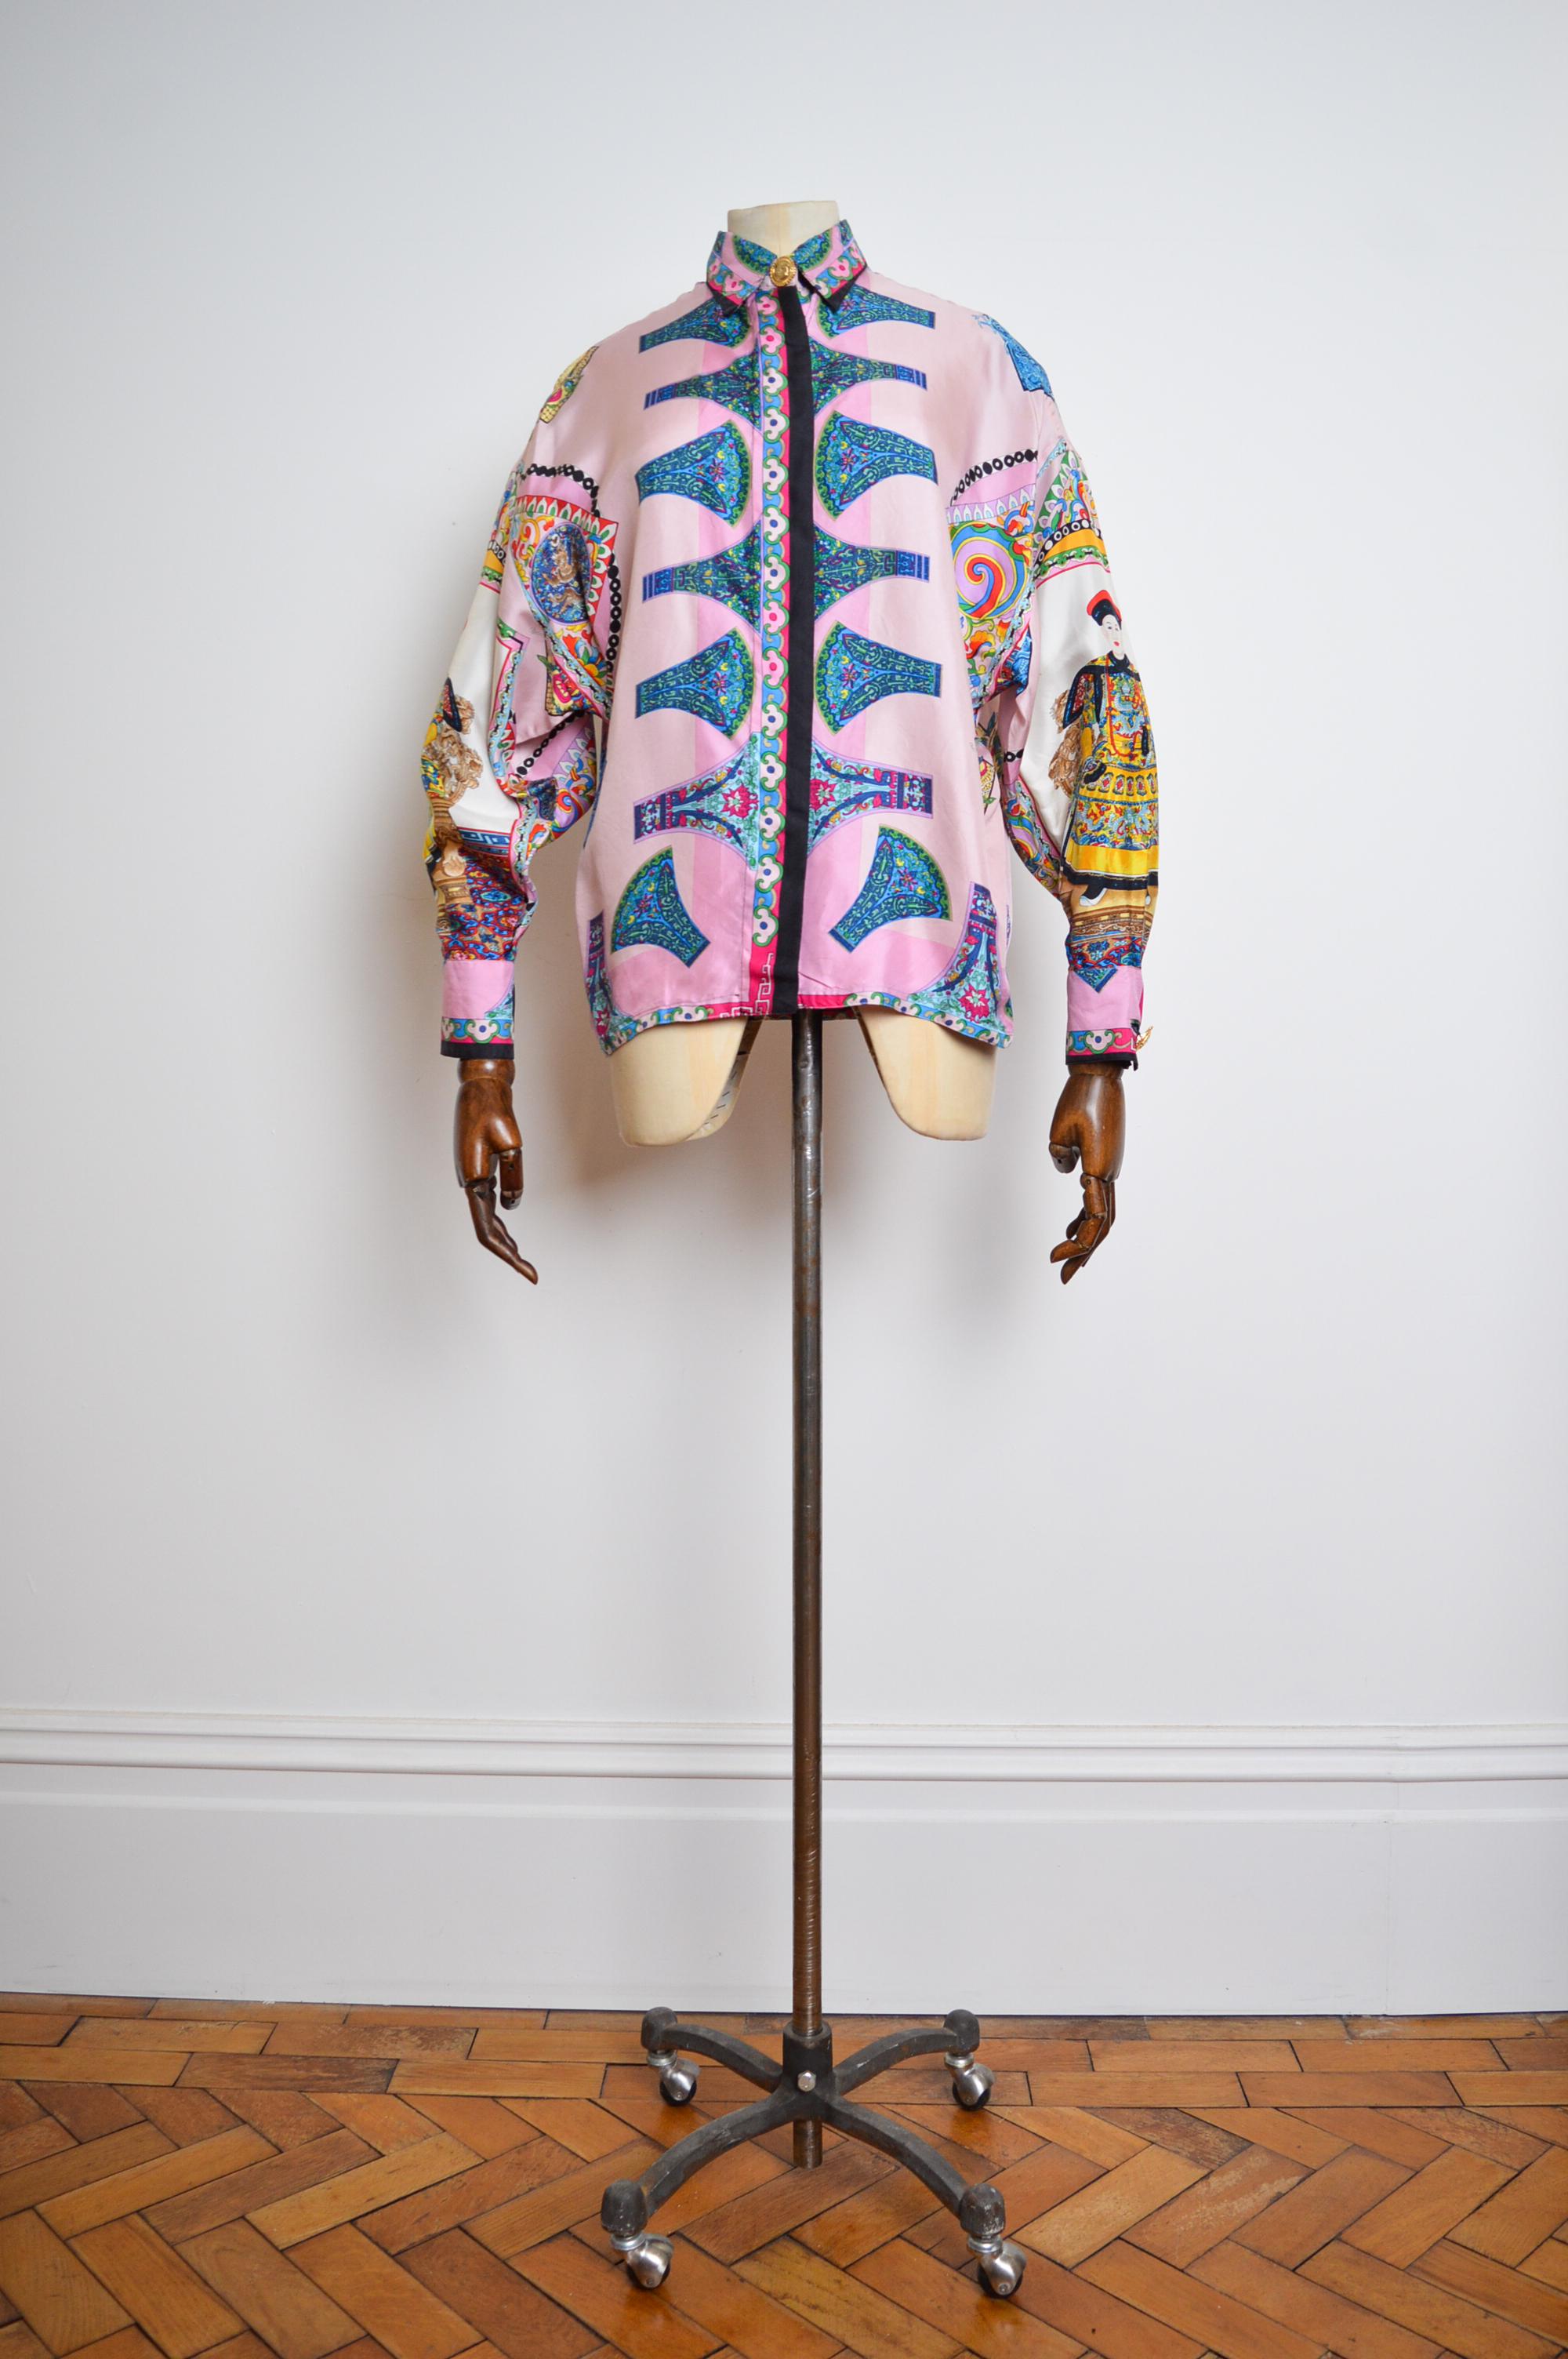 A Superb Gianni Versace Spring/Summer 1993 'ATELIER VERSACE' Baroque patterned Long sleeve Shirt, crafted from a vibrantly printed Silk displaying beautiful imagery of a Royal Chinese Emperor amongst other decorative motifs. 

MADE IN ITALY.  